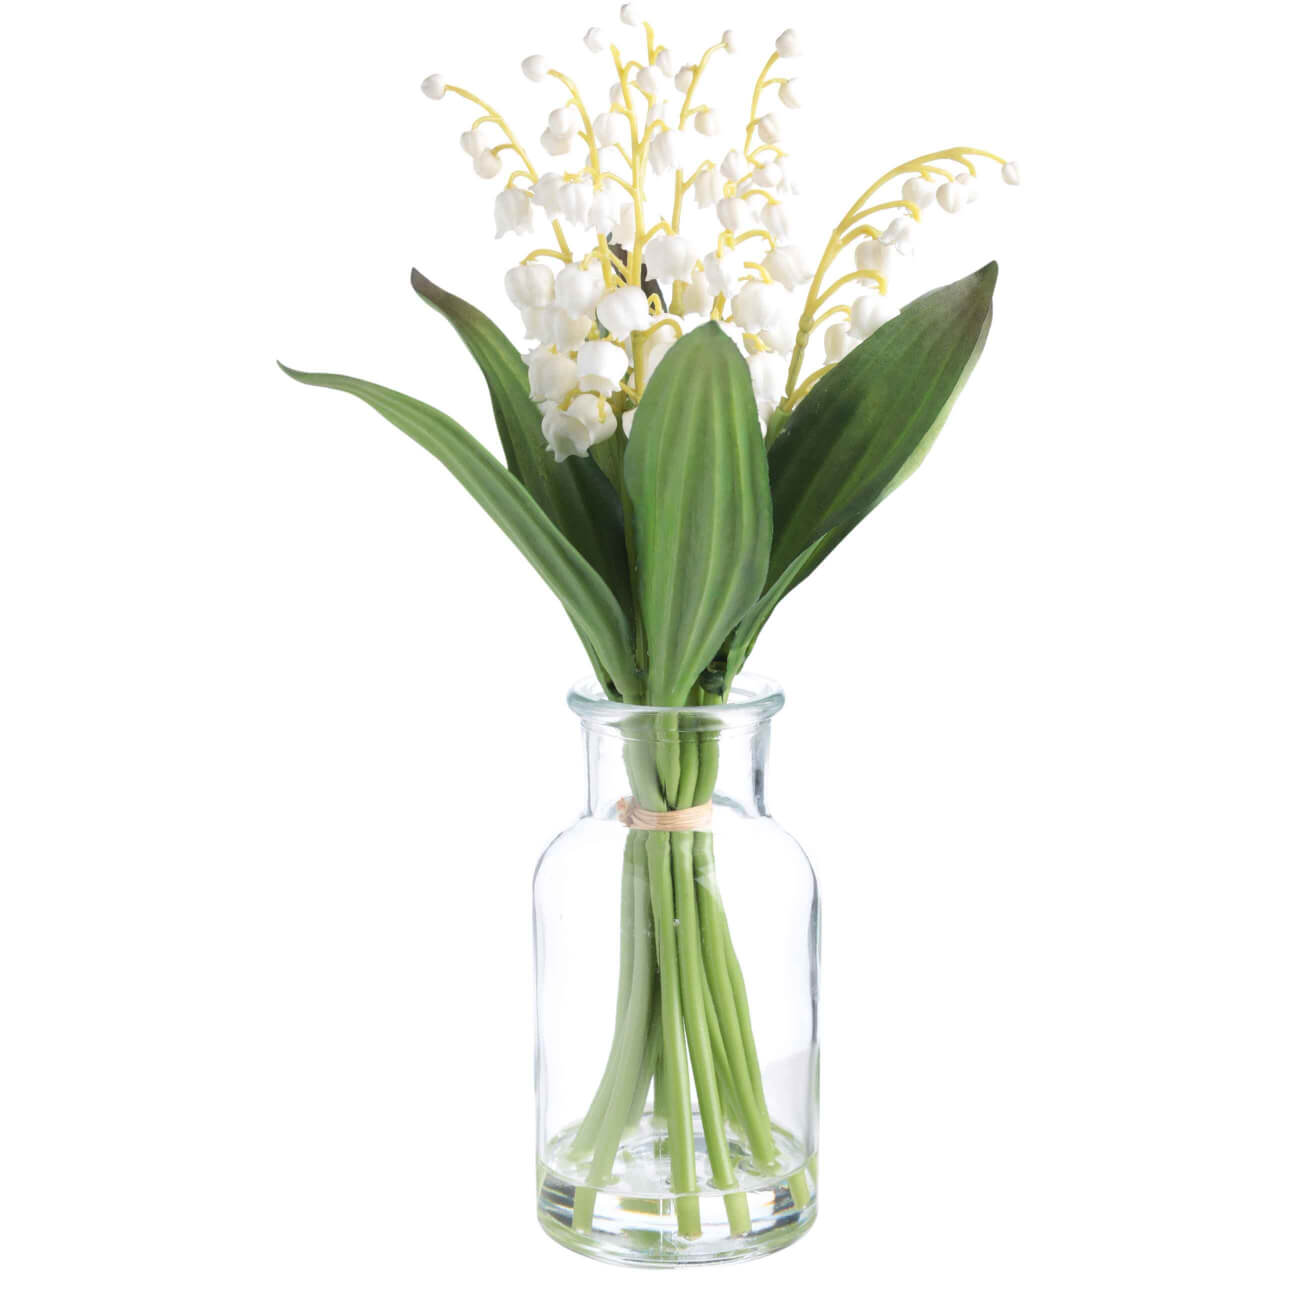 Artificial bouquet, 28 cm, in a vase, rubber / glass, Lily of the valley, May-lily изображение № 1